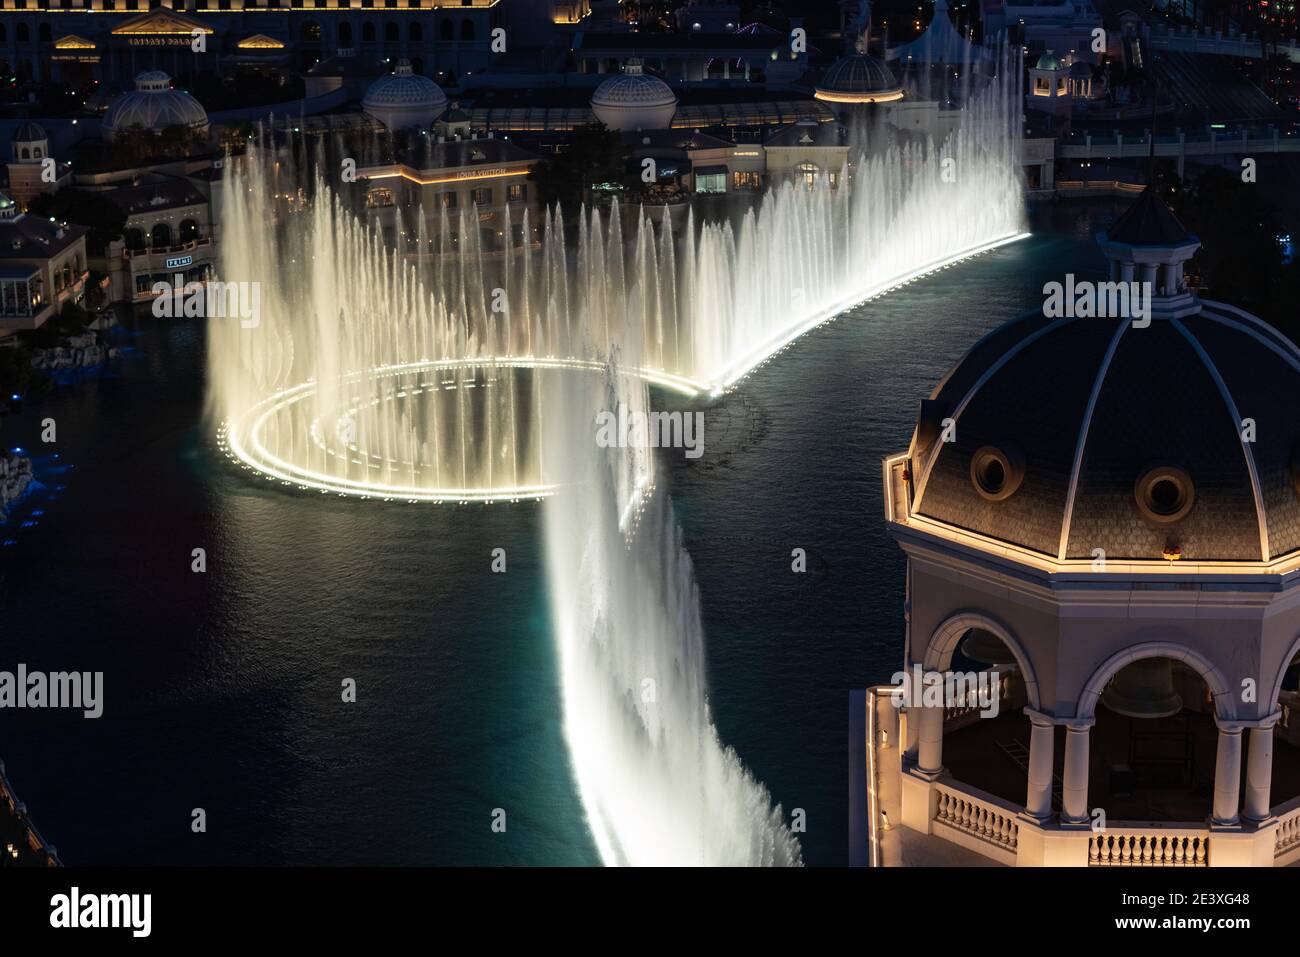 The Fountains of Bellagio put on their water show at night on the Las Vegas Strip Stock Photo